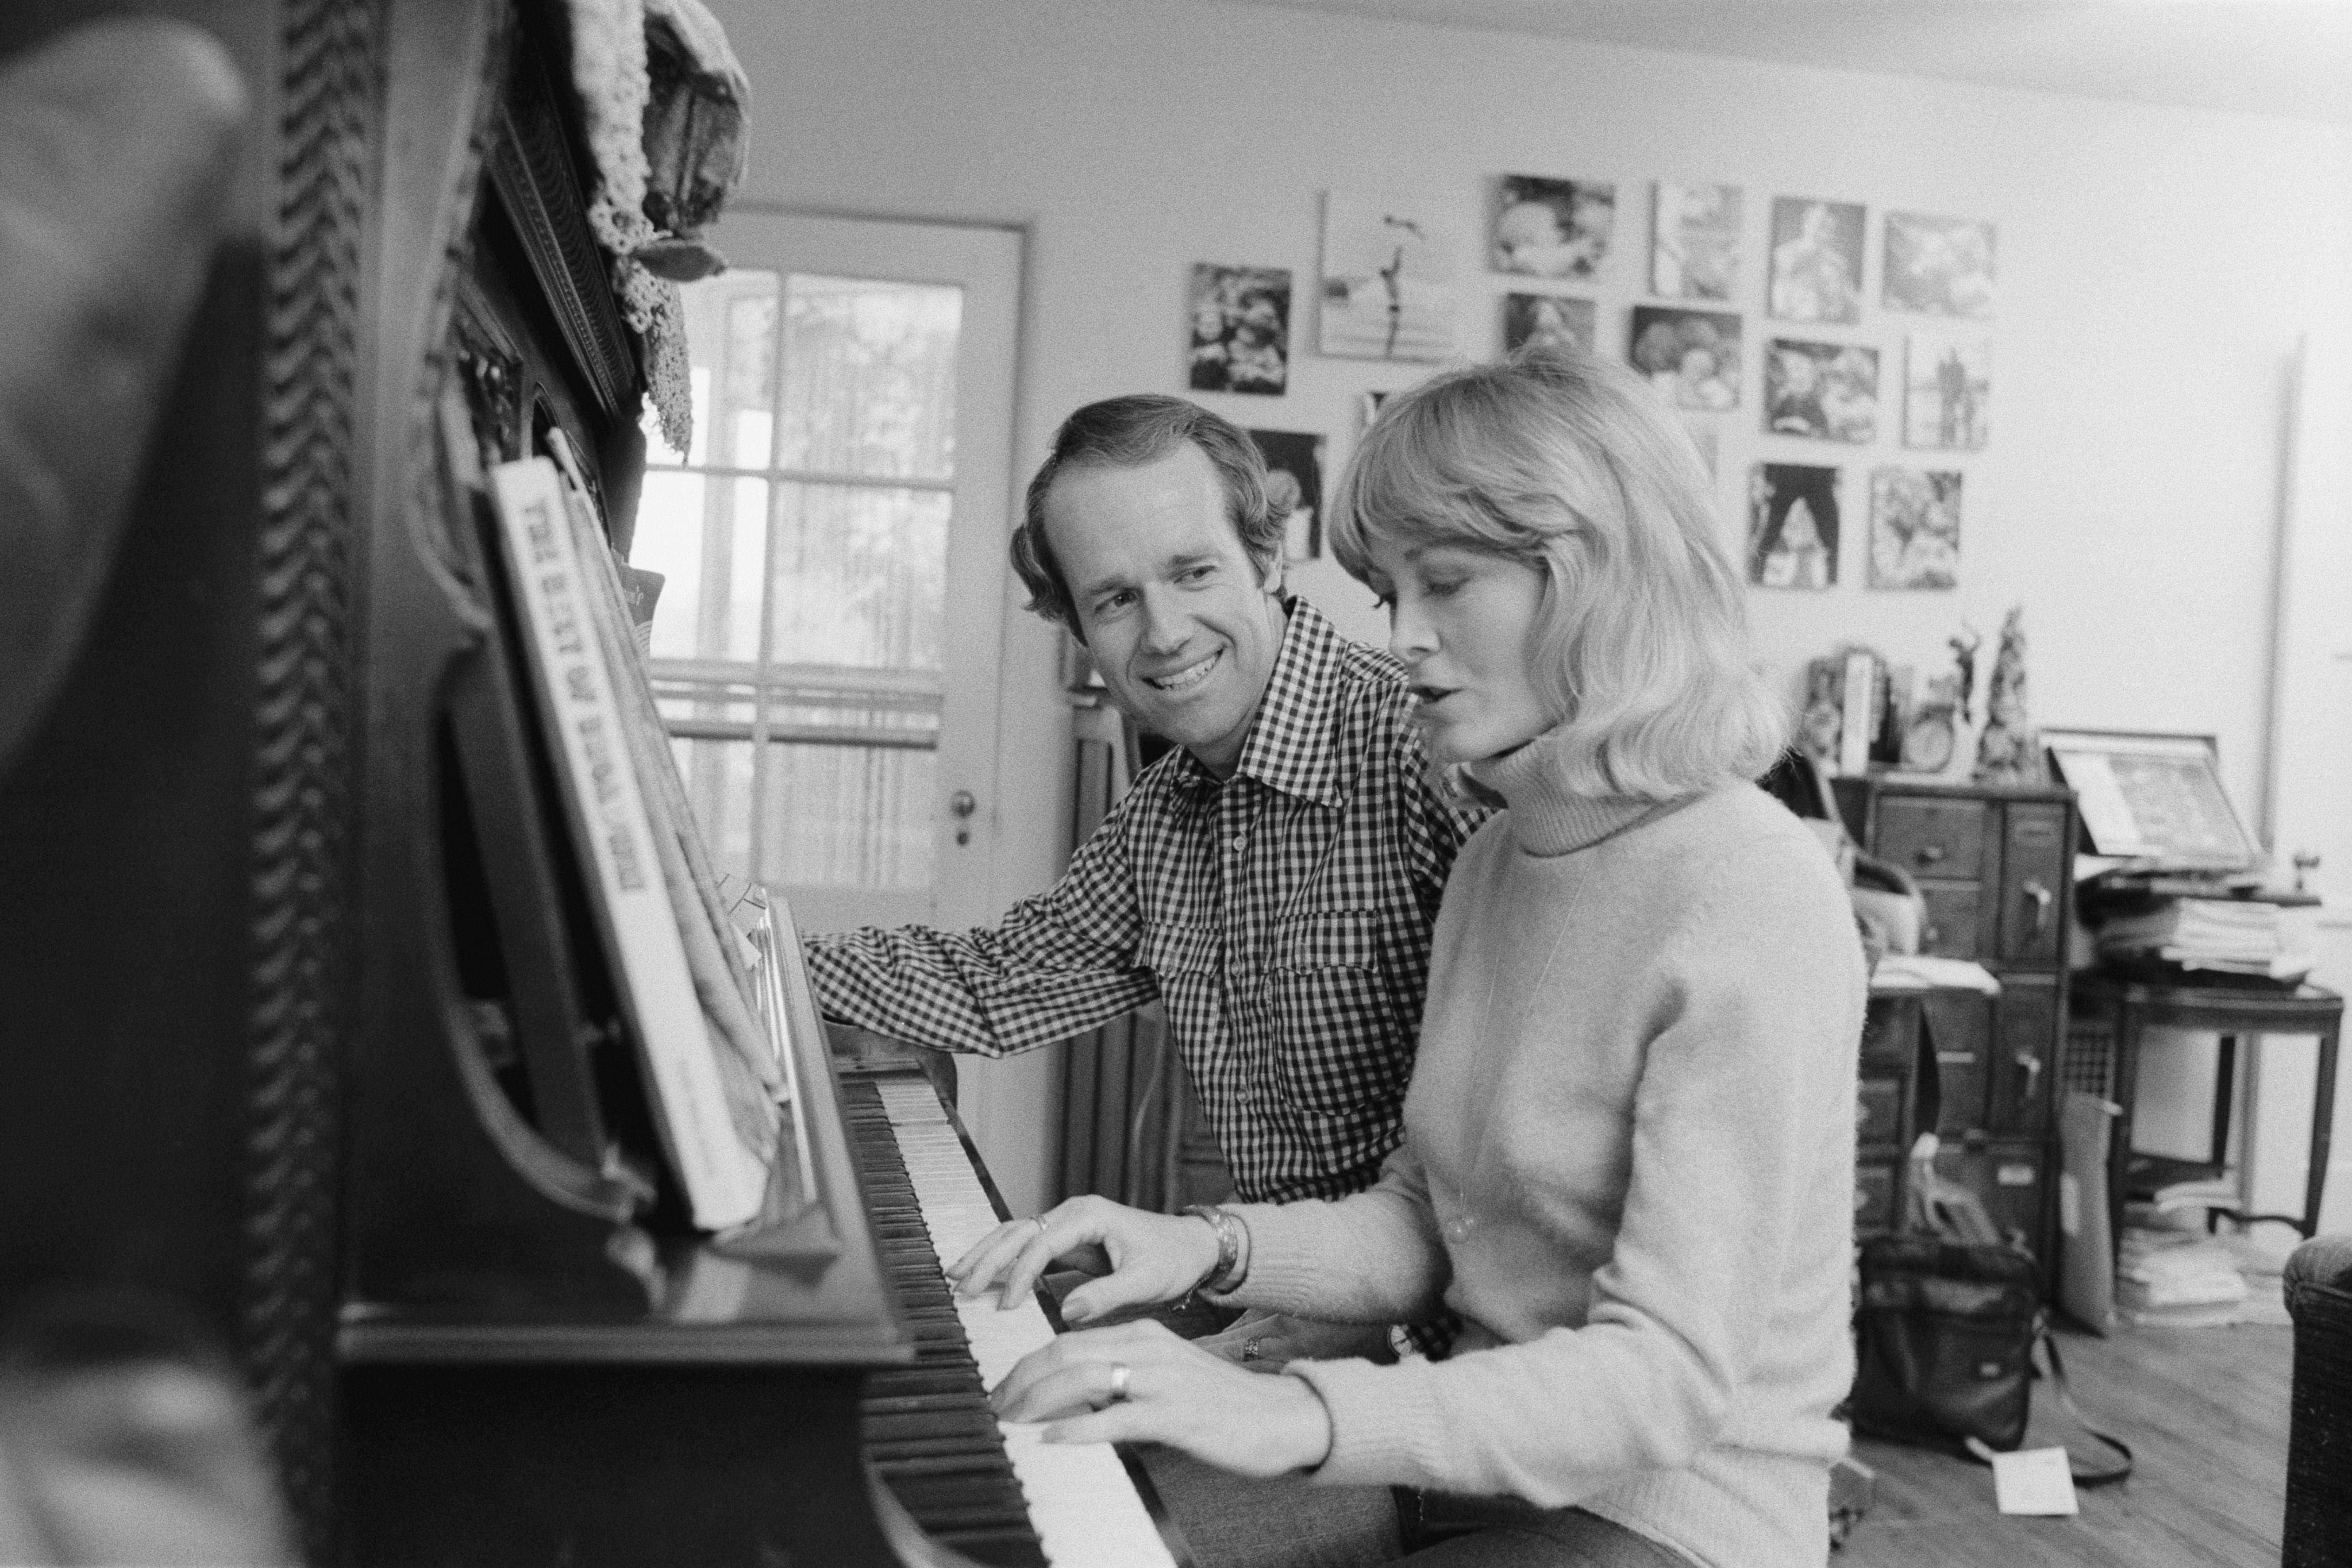 Mike and Judy Farrell sitting at their piano in their home | Source: Getty Images